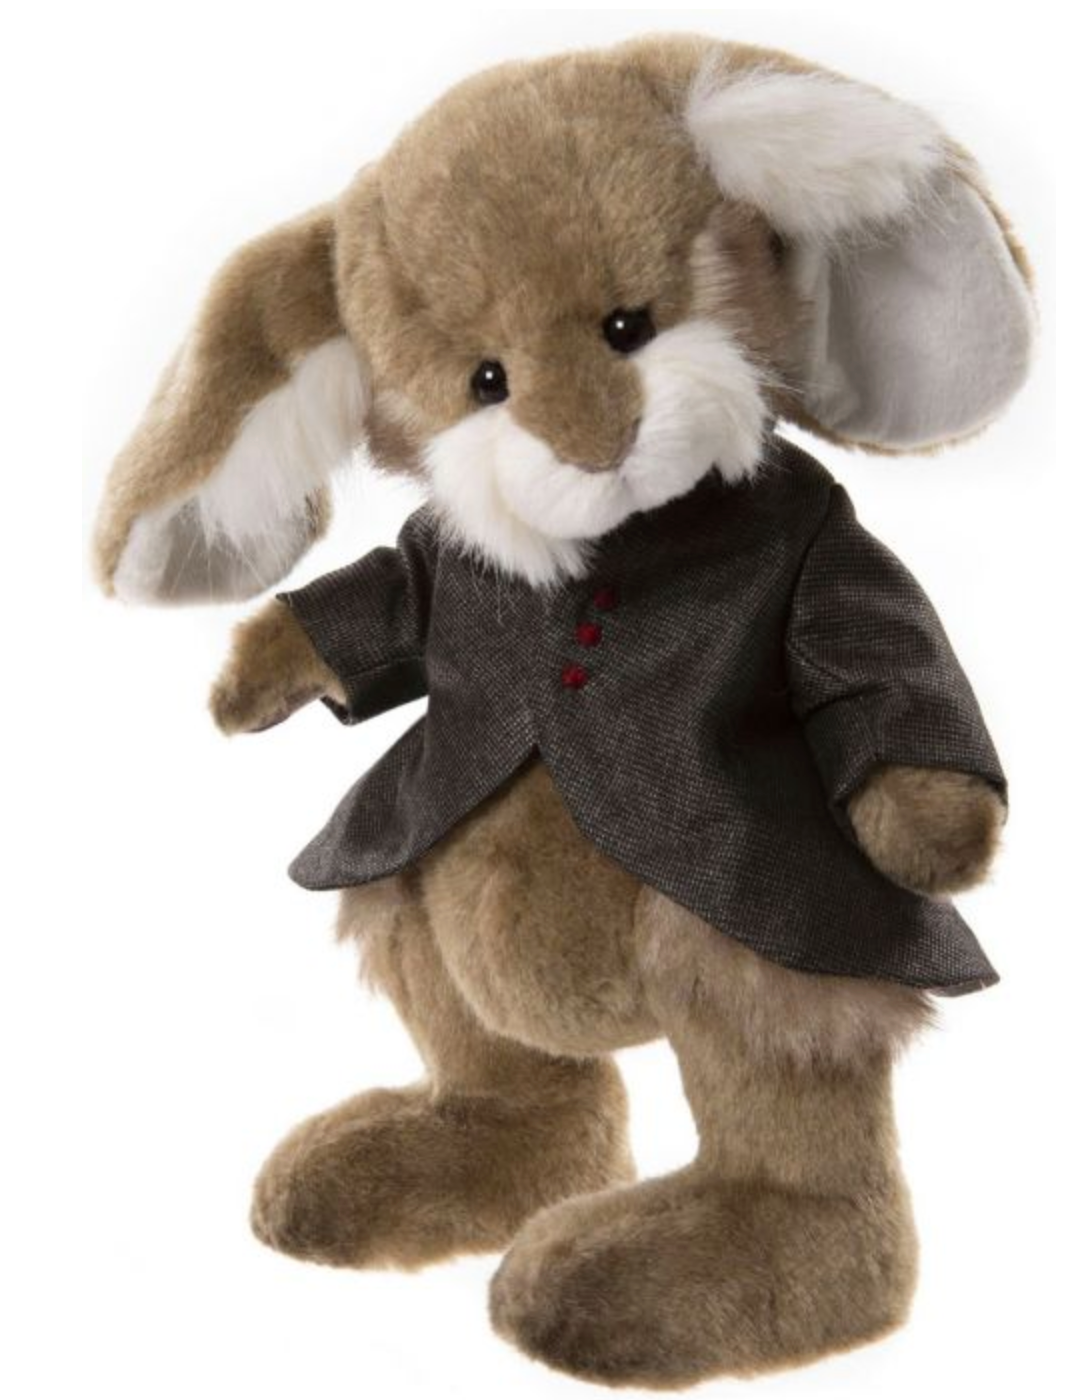 Snicket - 13” Plush Rabbit by Charlie Bears